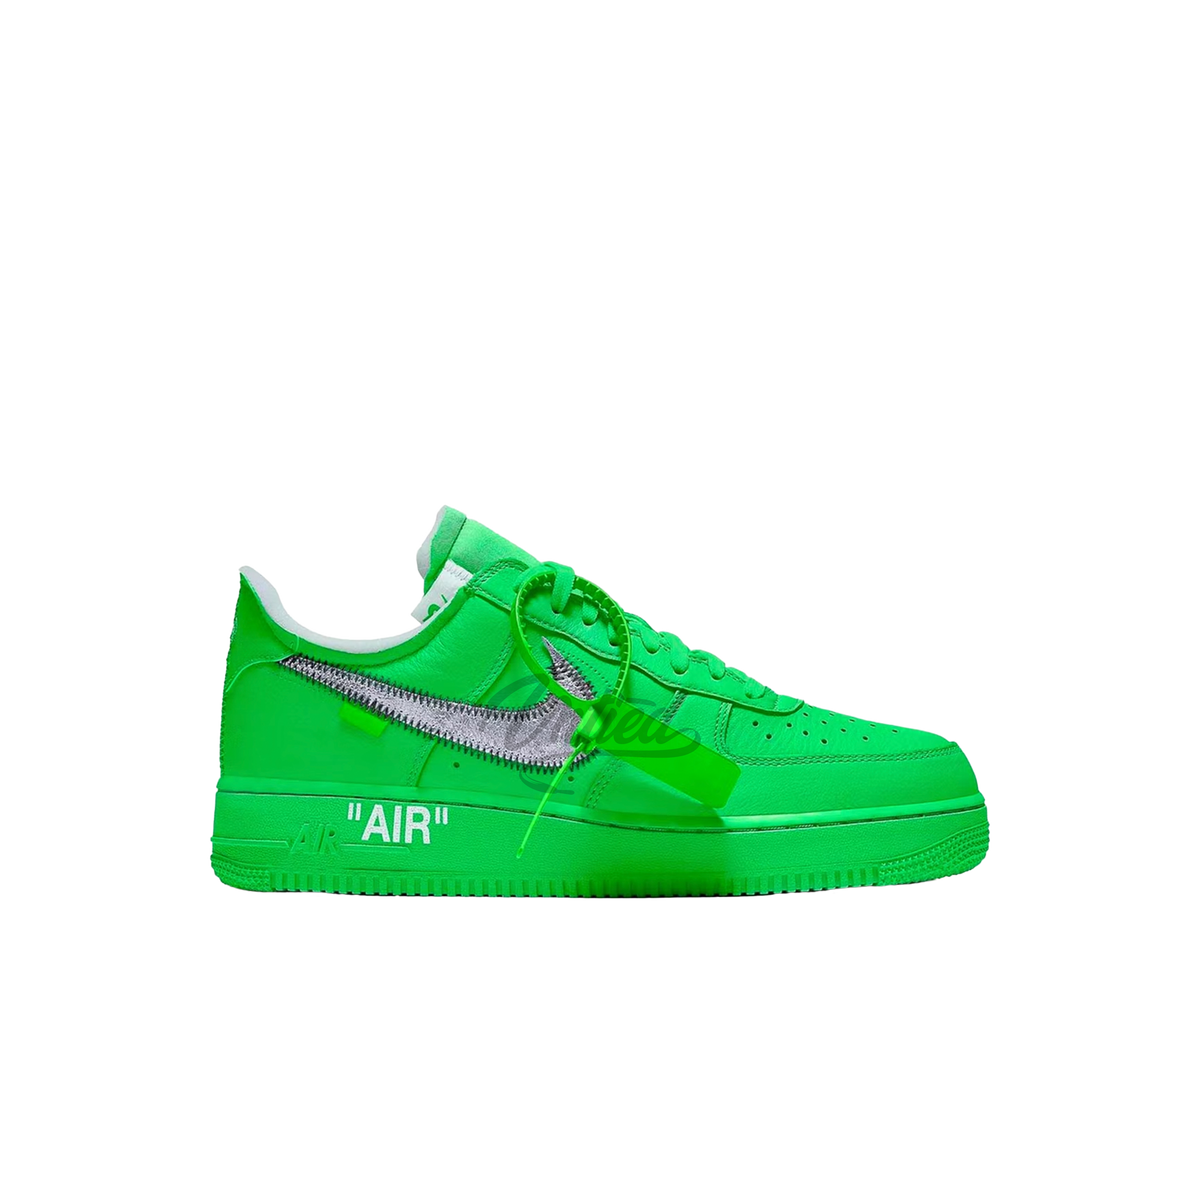 Off-White Nike Air Force 1 Low "Light Green Spark"